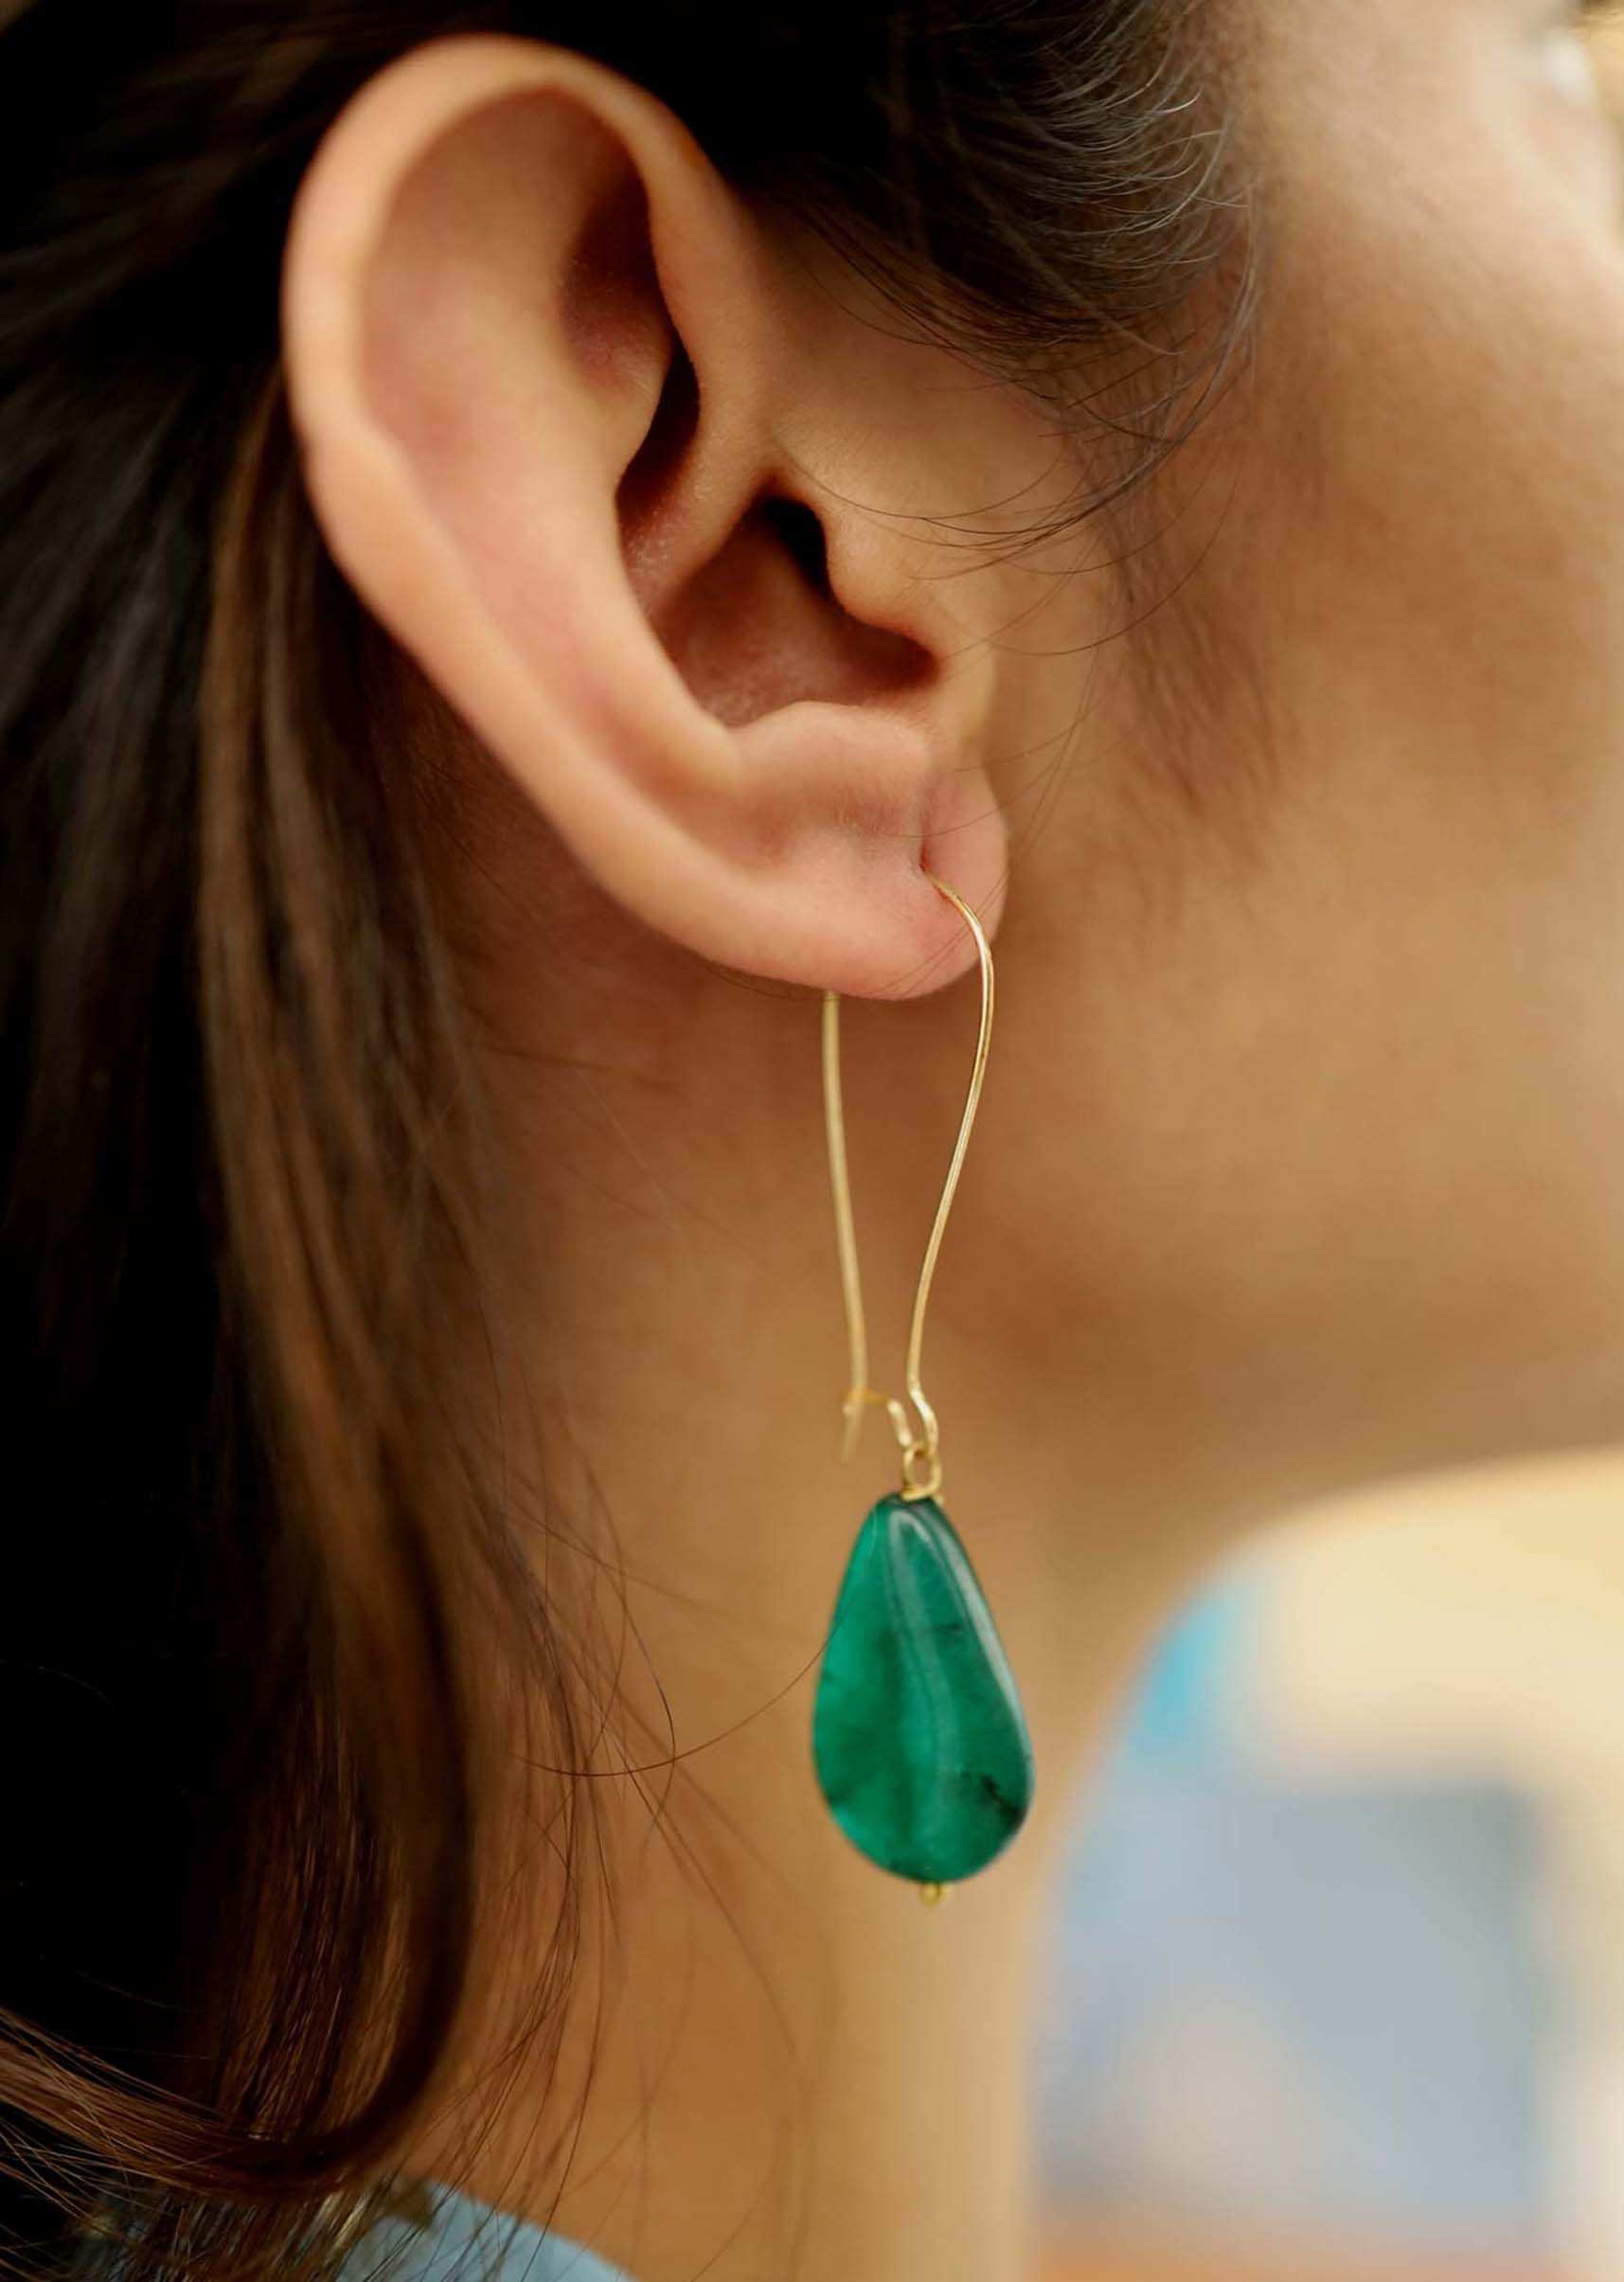 Gold Plated Earrings With Dangling Green Jade Drop